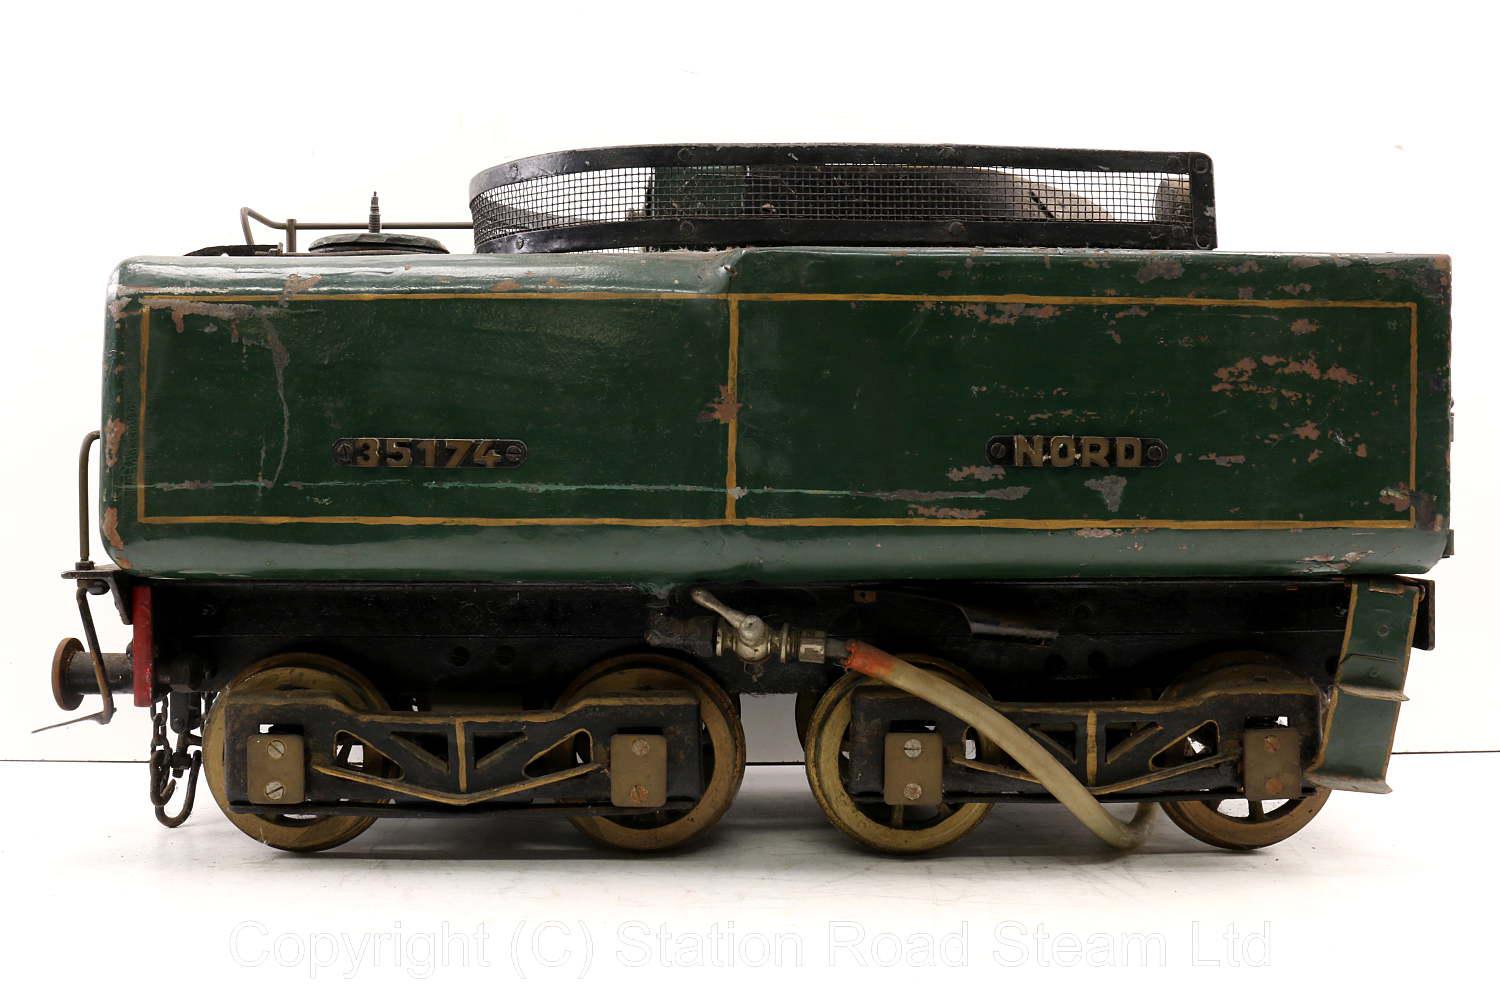 5 inch gauge Nord Pacific